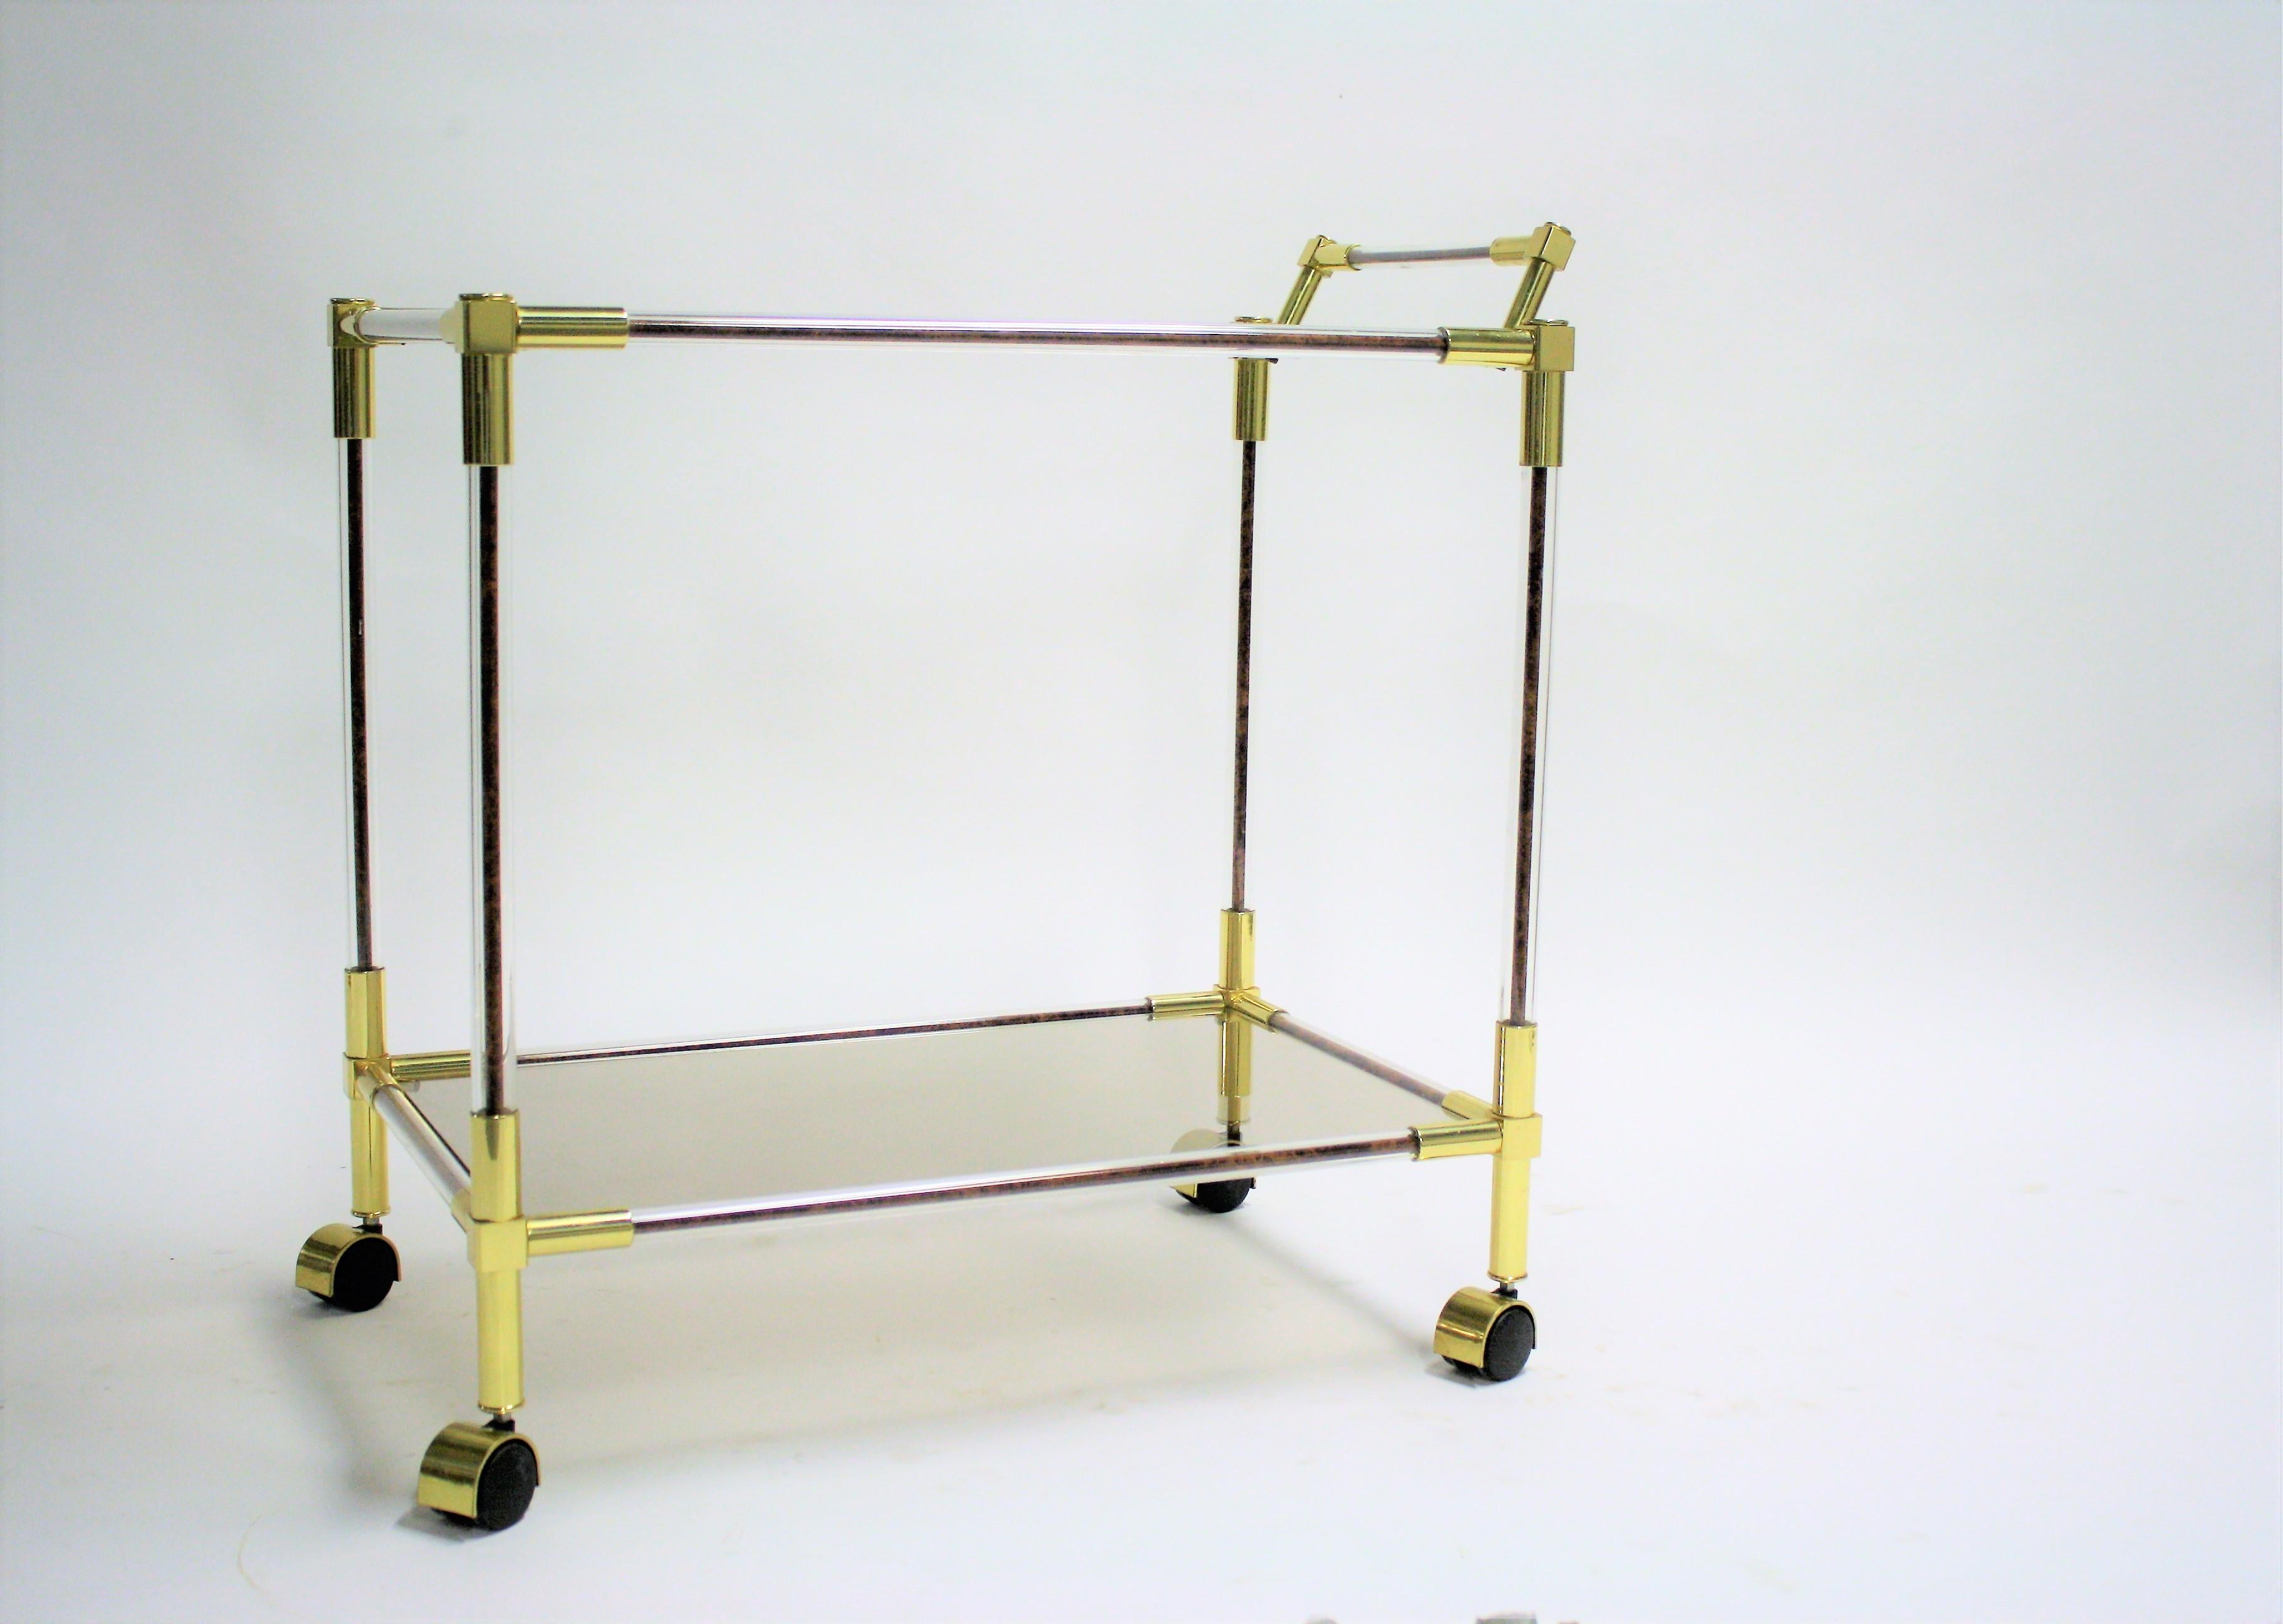 A Hollywood Regency two-tier dessert trolley.

The trolley has a brass and Lucite frame with burl wood and smoked glass shelves.

Very good condition.

Beautiful trolley to present plates, drinks or even to use in a shop for other